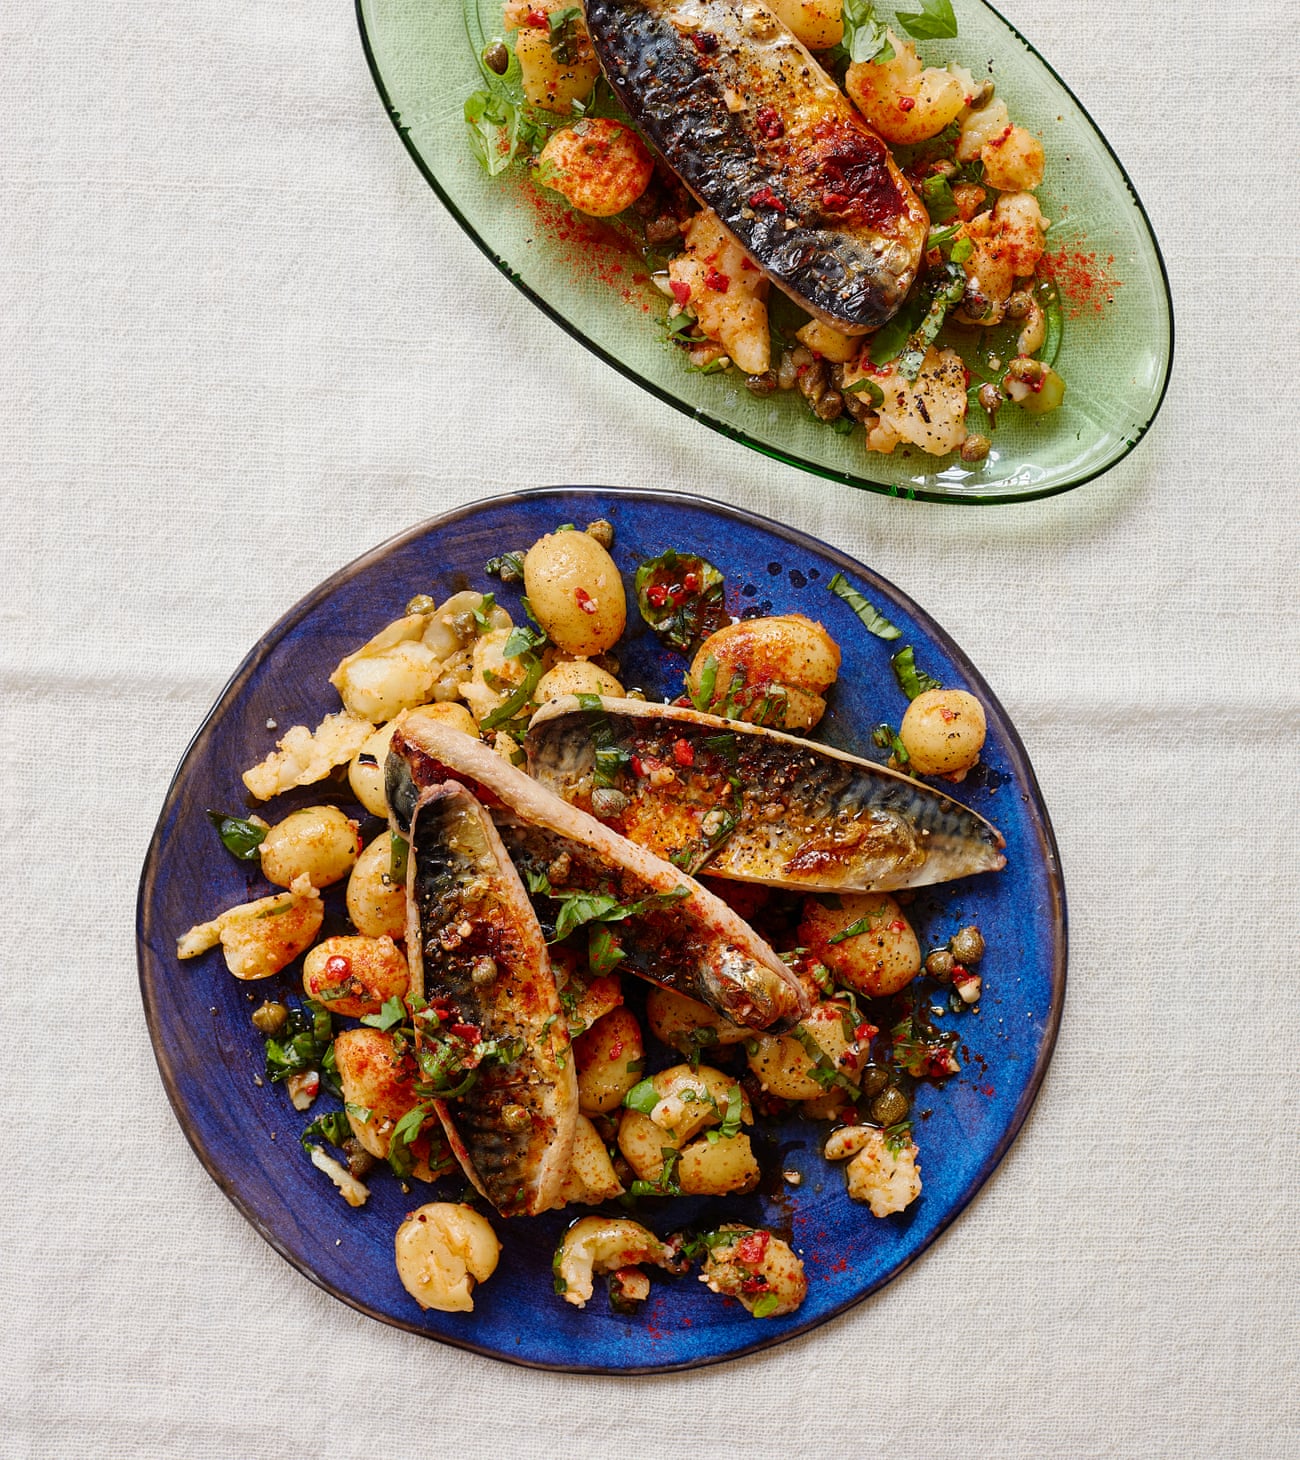 Thomasina Miers' chargrilled mackerel with a a warm new potato, lemon and caper salad.